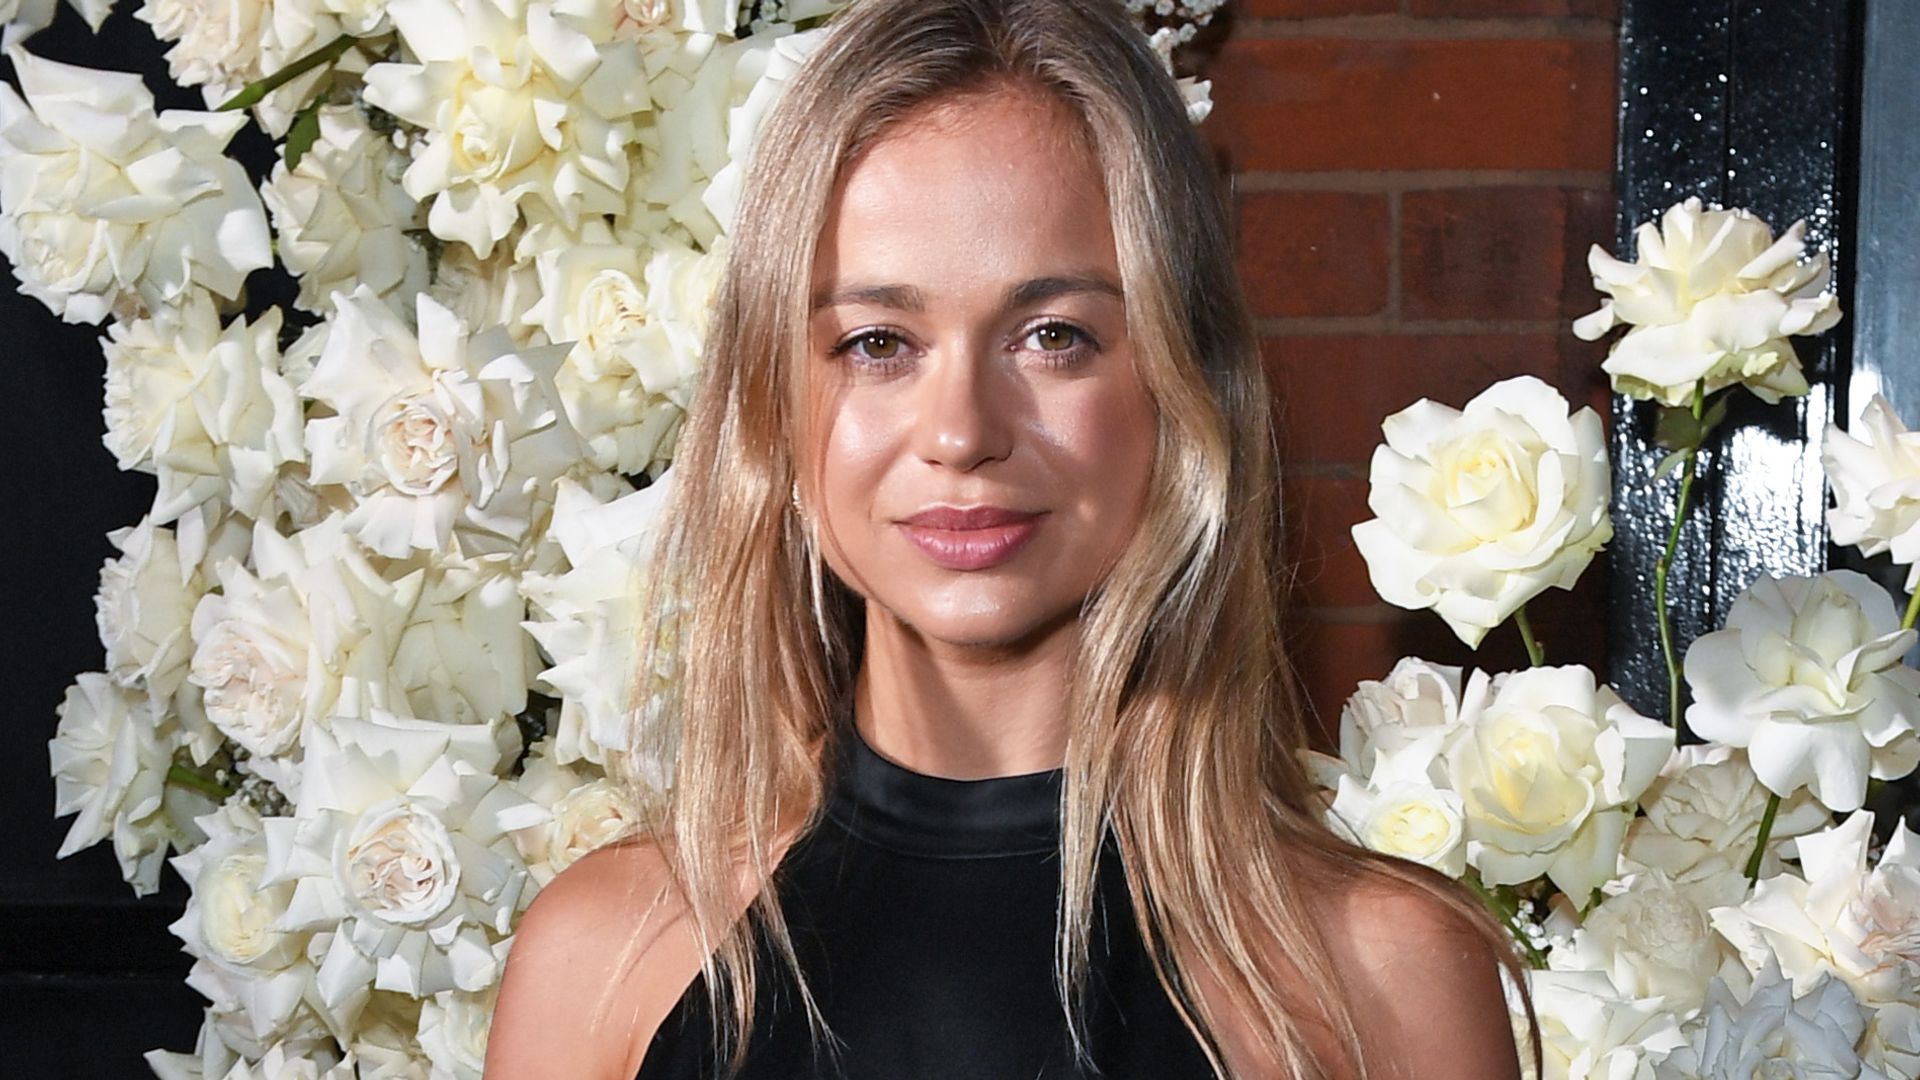 Lady Amelia Windsor just rocked edgy denim shorts and knee-high boots